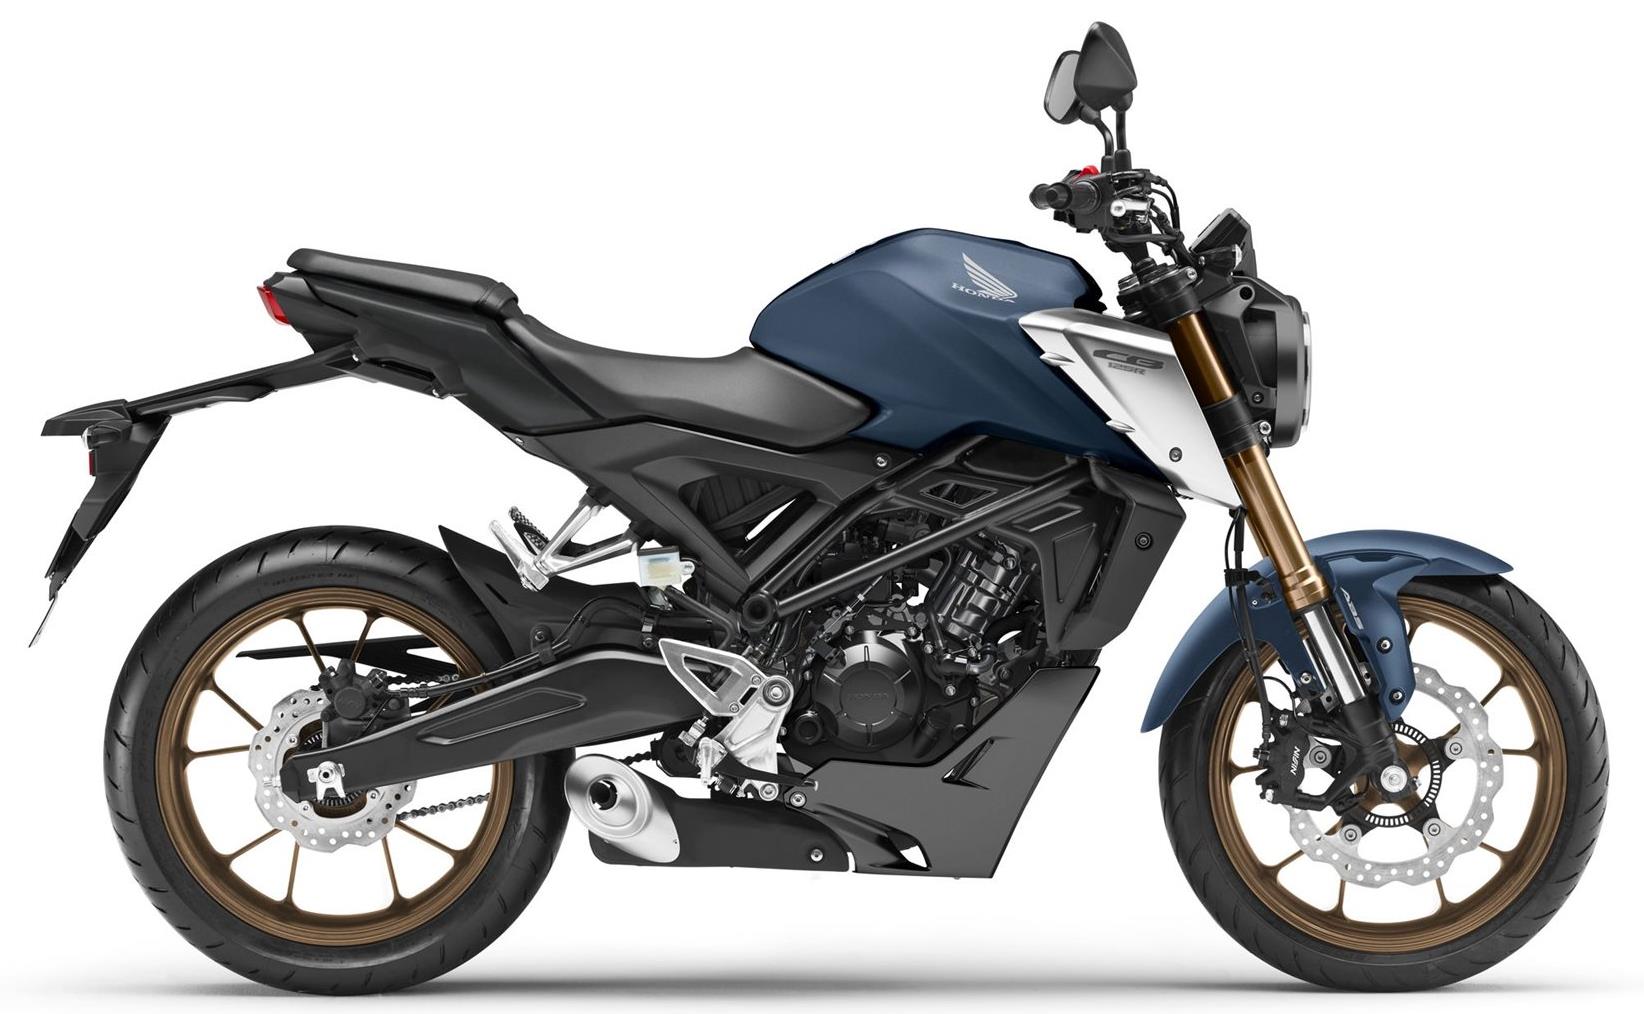 2021 Honda CB125R Tech Specs and Expected Price in India